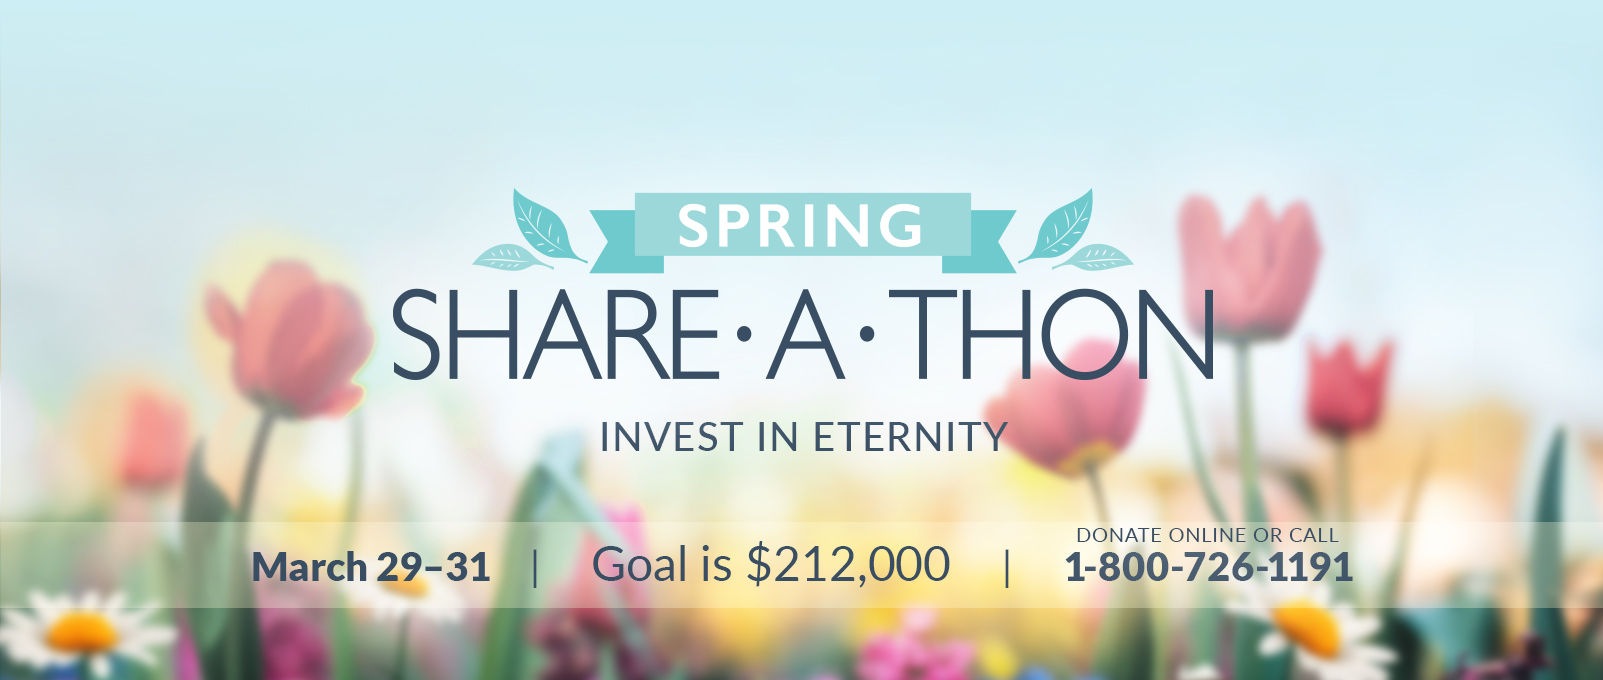 Spring Share A Thon